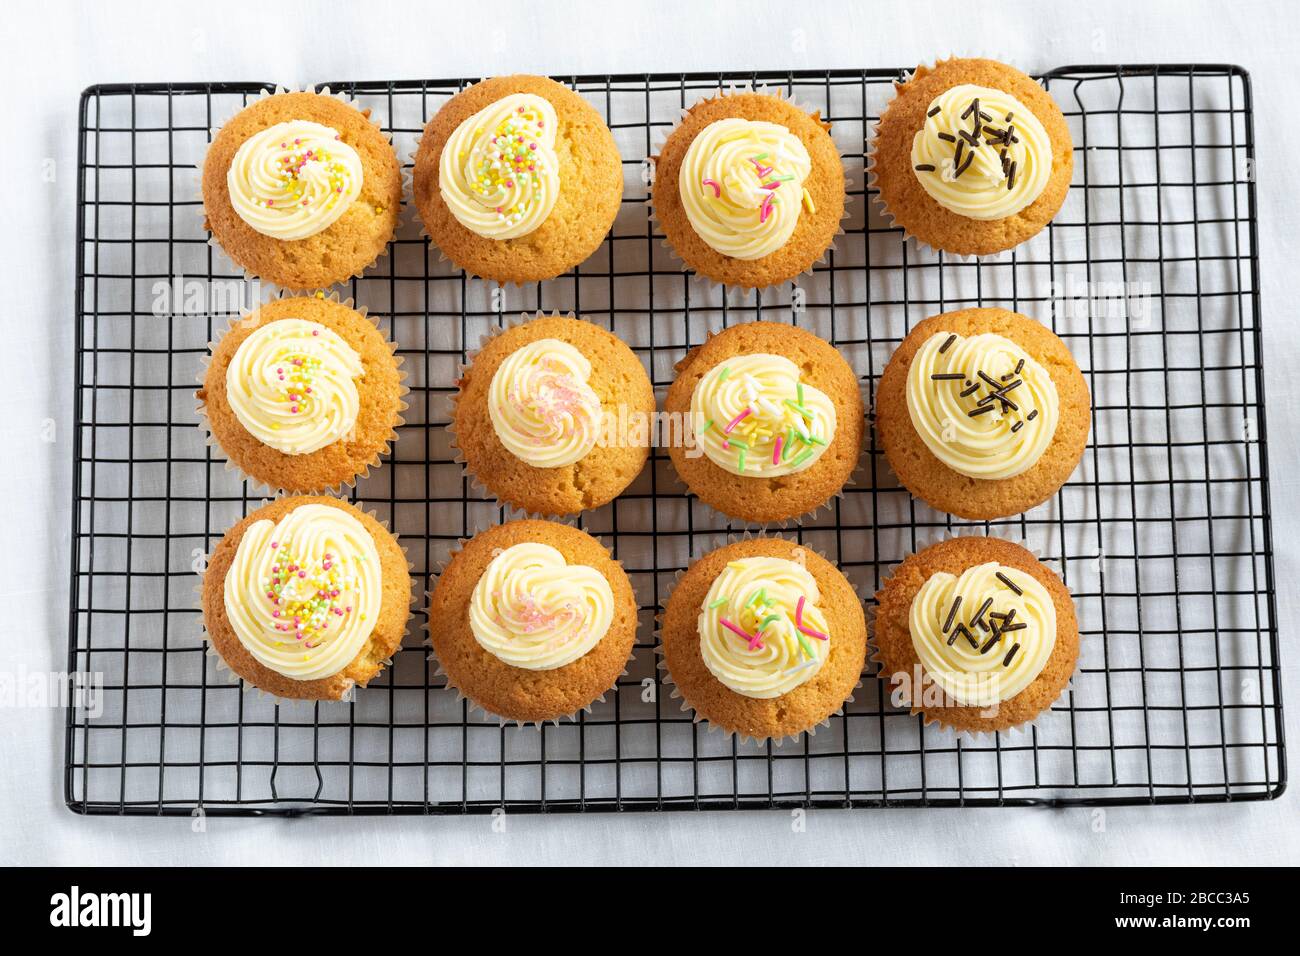 Close up of homemade cupcakes / fairy cakes on a cooling tray Stock Photo